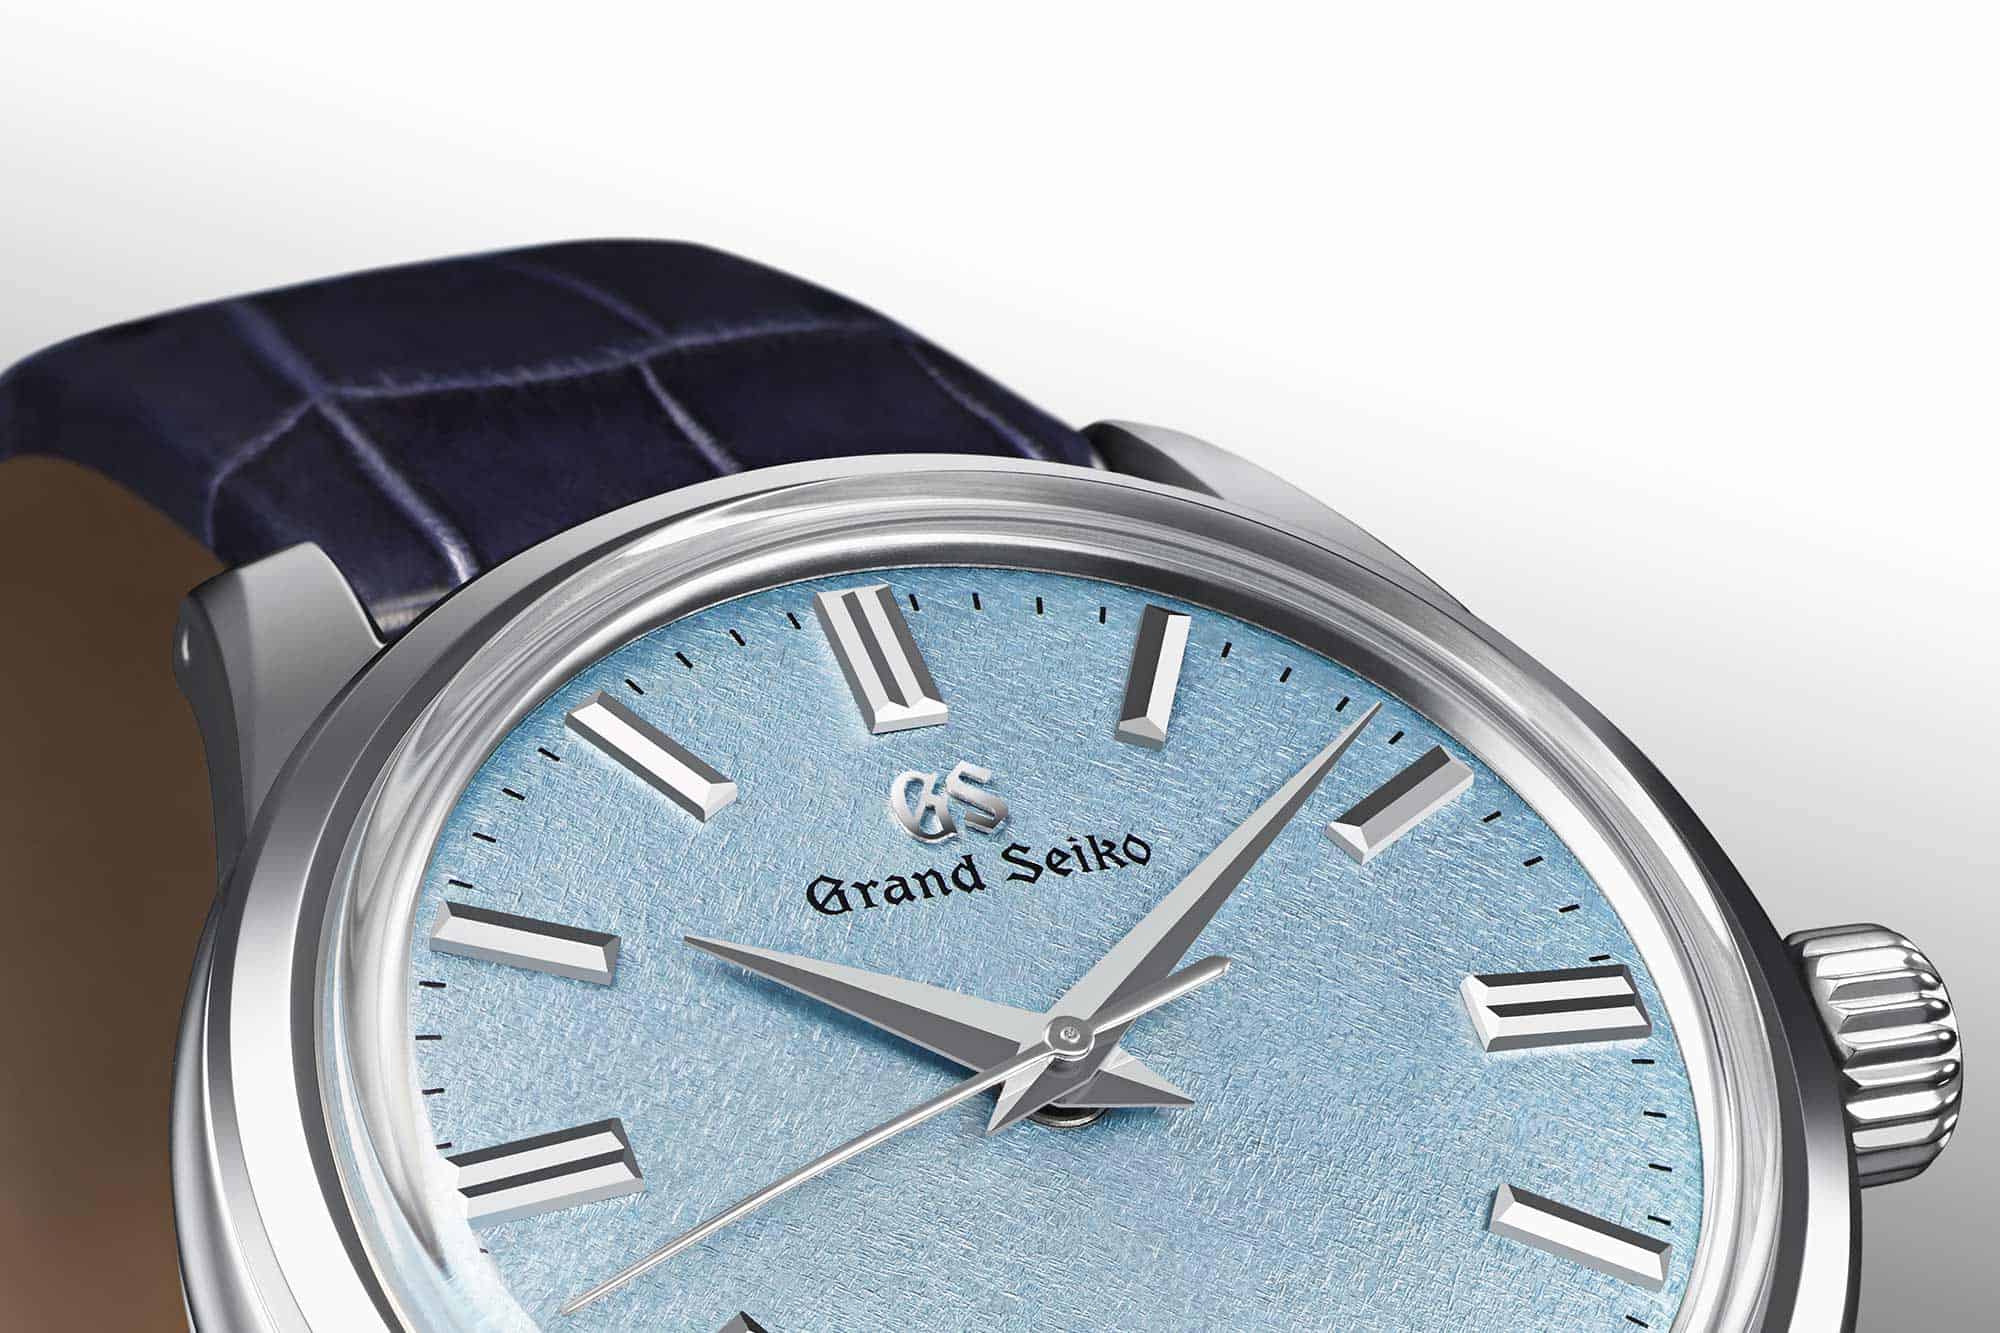 Grand Seiko Drops Two New Dress Watches with Textured Dials - Worn & Wound